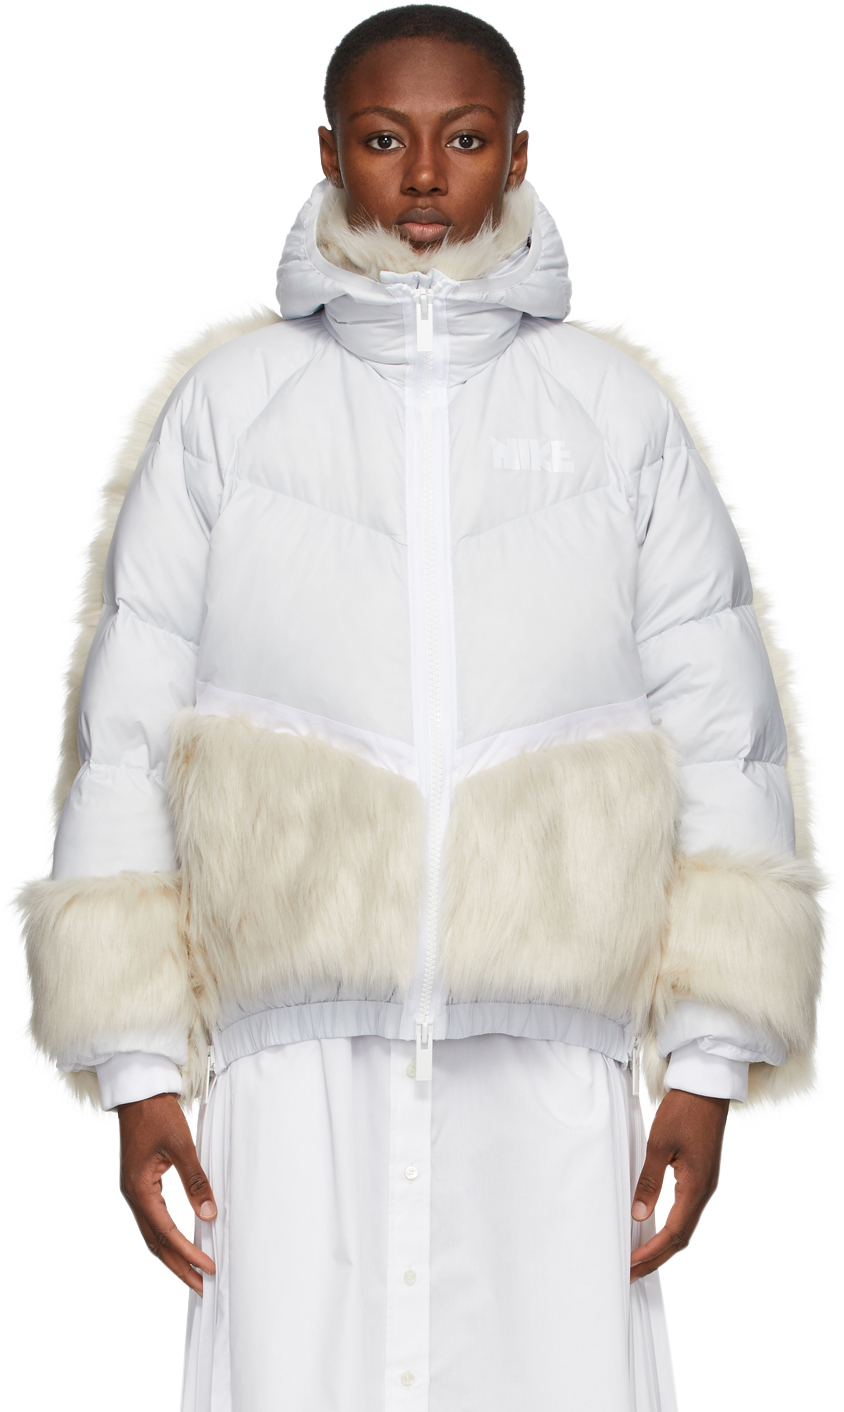 White Sacai Edition Down NGR Parka by Nike on Sale